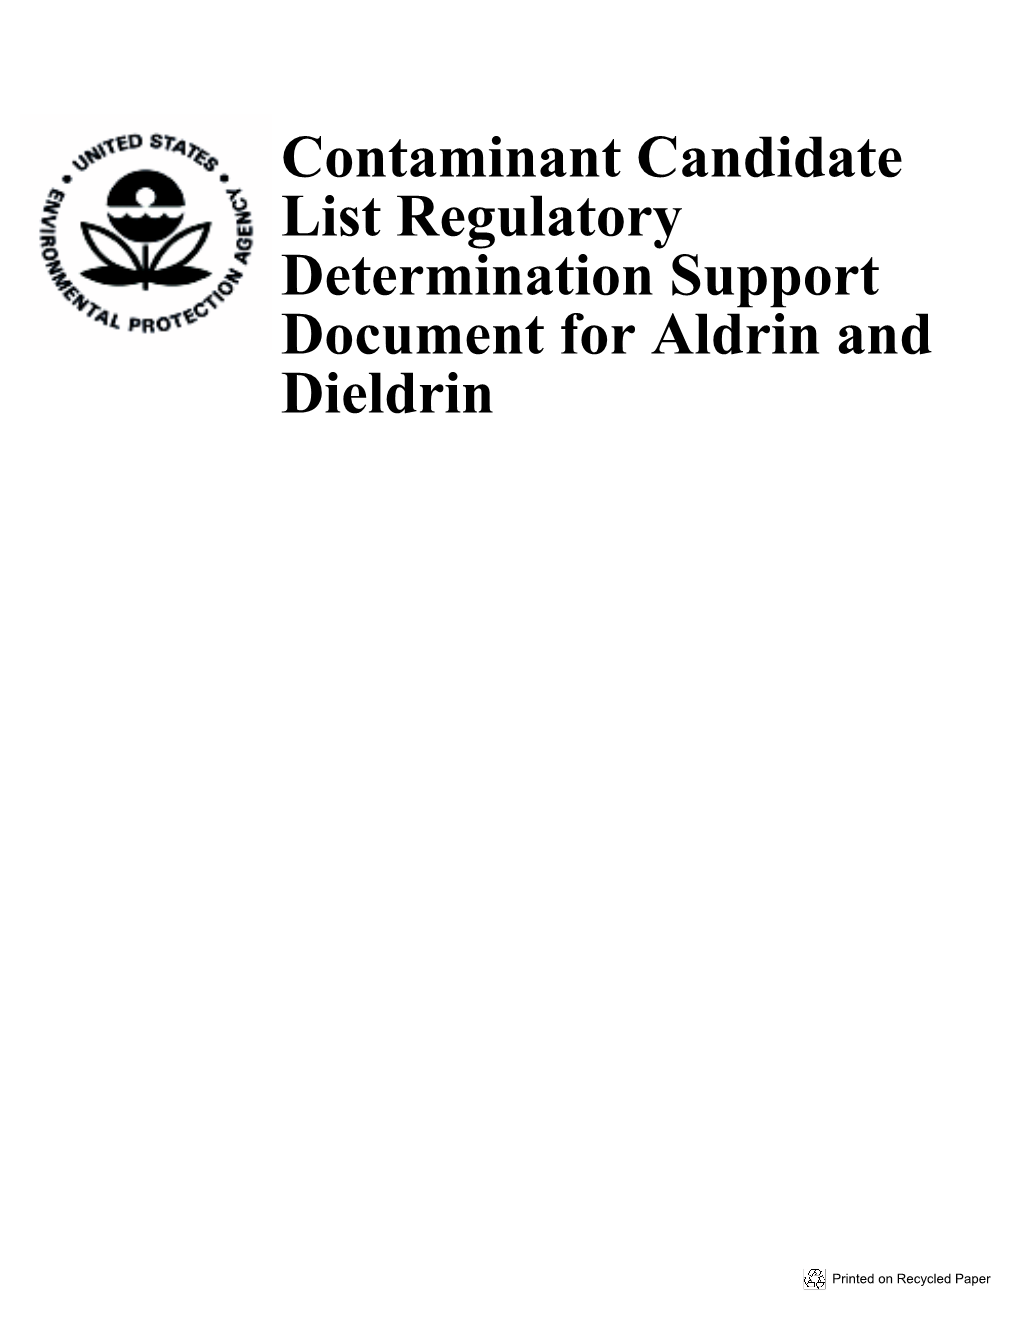 Contaminant Candidate List Regulatory Determination Support Document for Aldrin and Dieldrin